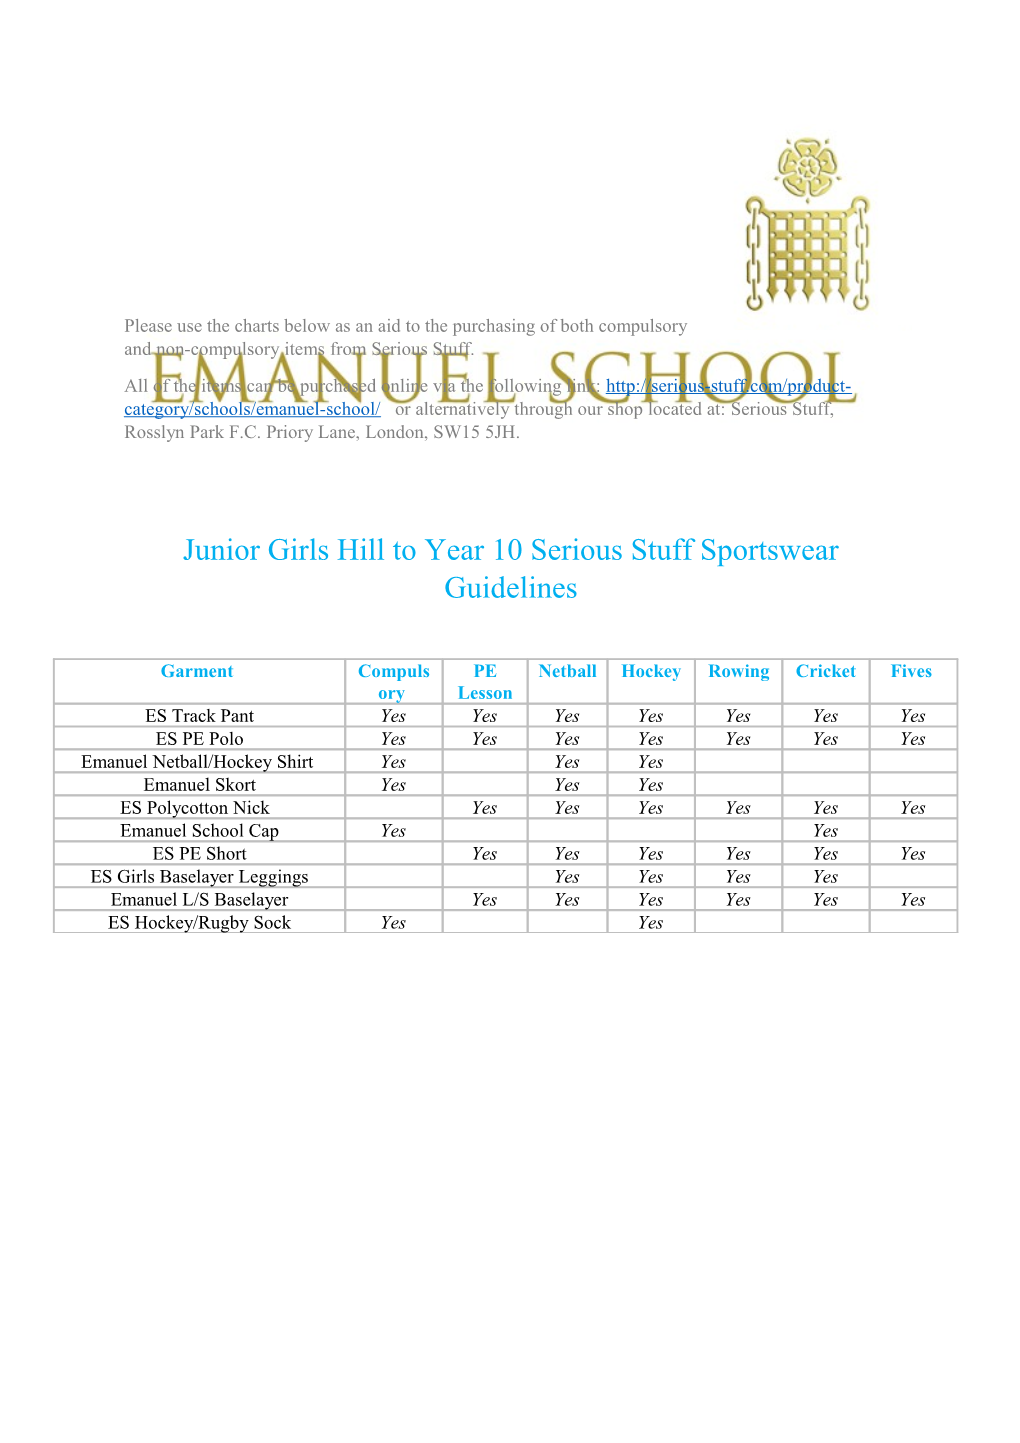 Junior Girls Hill to Year 10 Serious Stuff Sportswear Guidelines